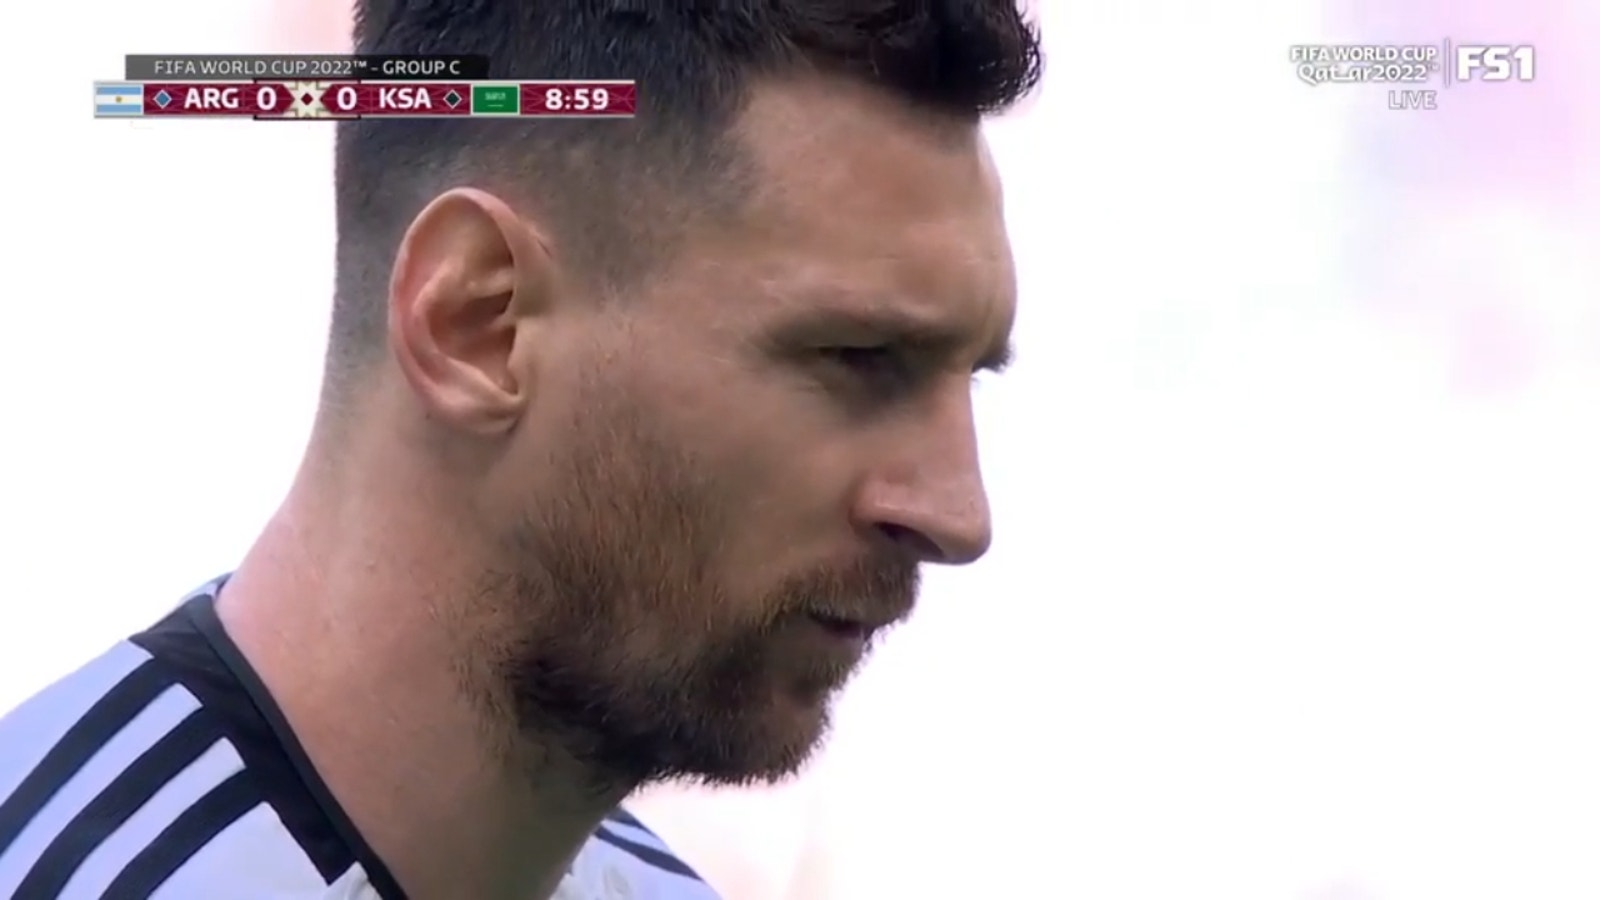 Lionel Messi scores a PK for Argentina in the 10th minute to take a 1-0 lead against Saudi Arabia